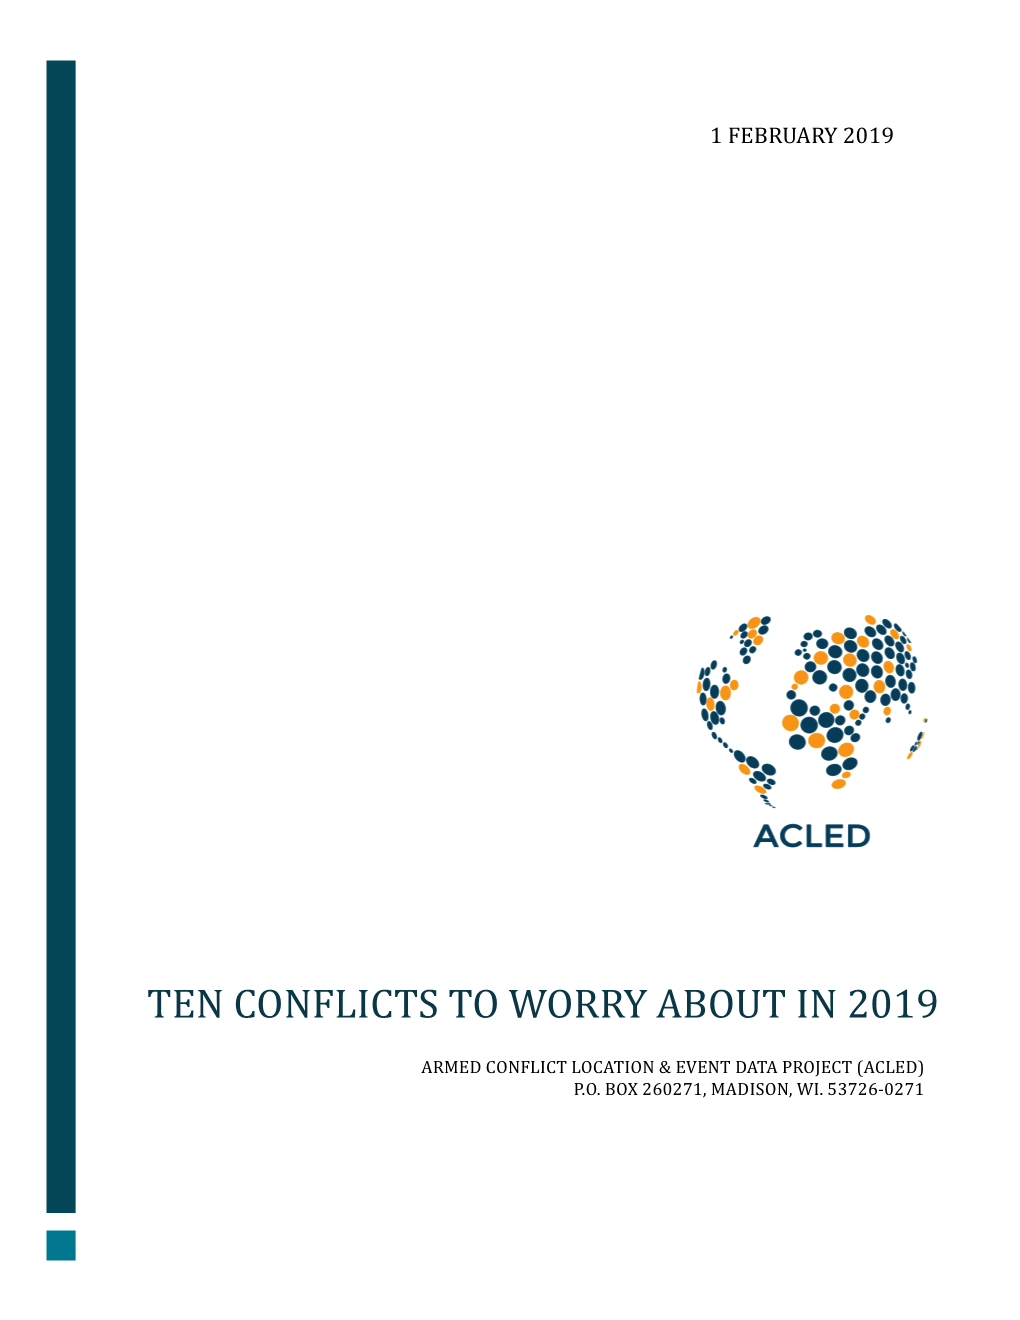 Ten Conflicts to Worry About in 2019